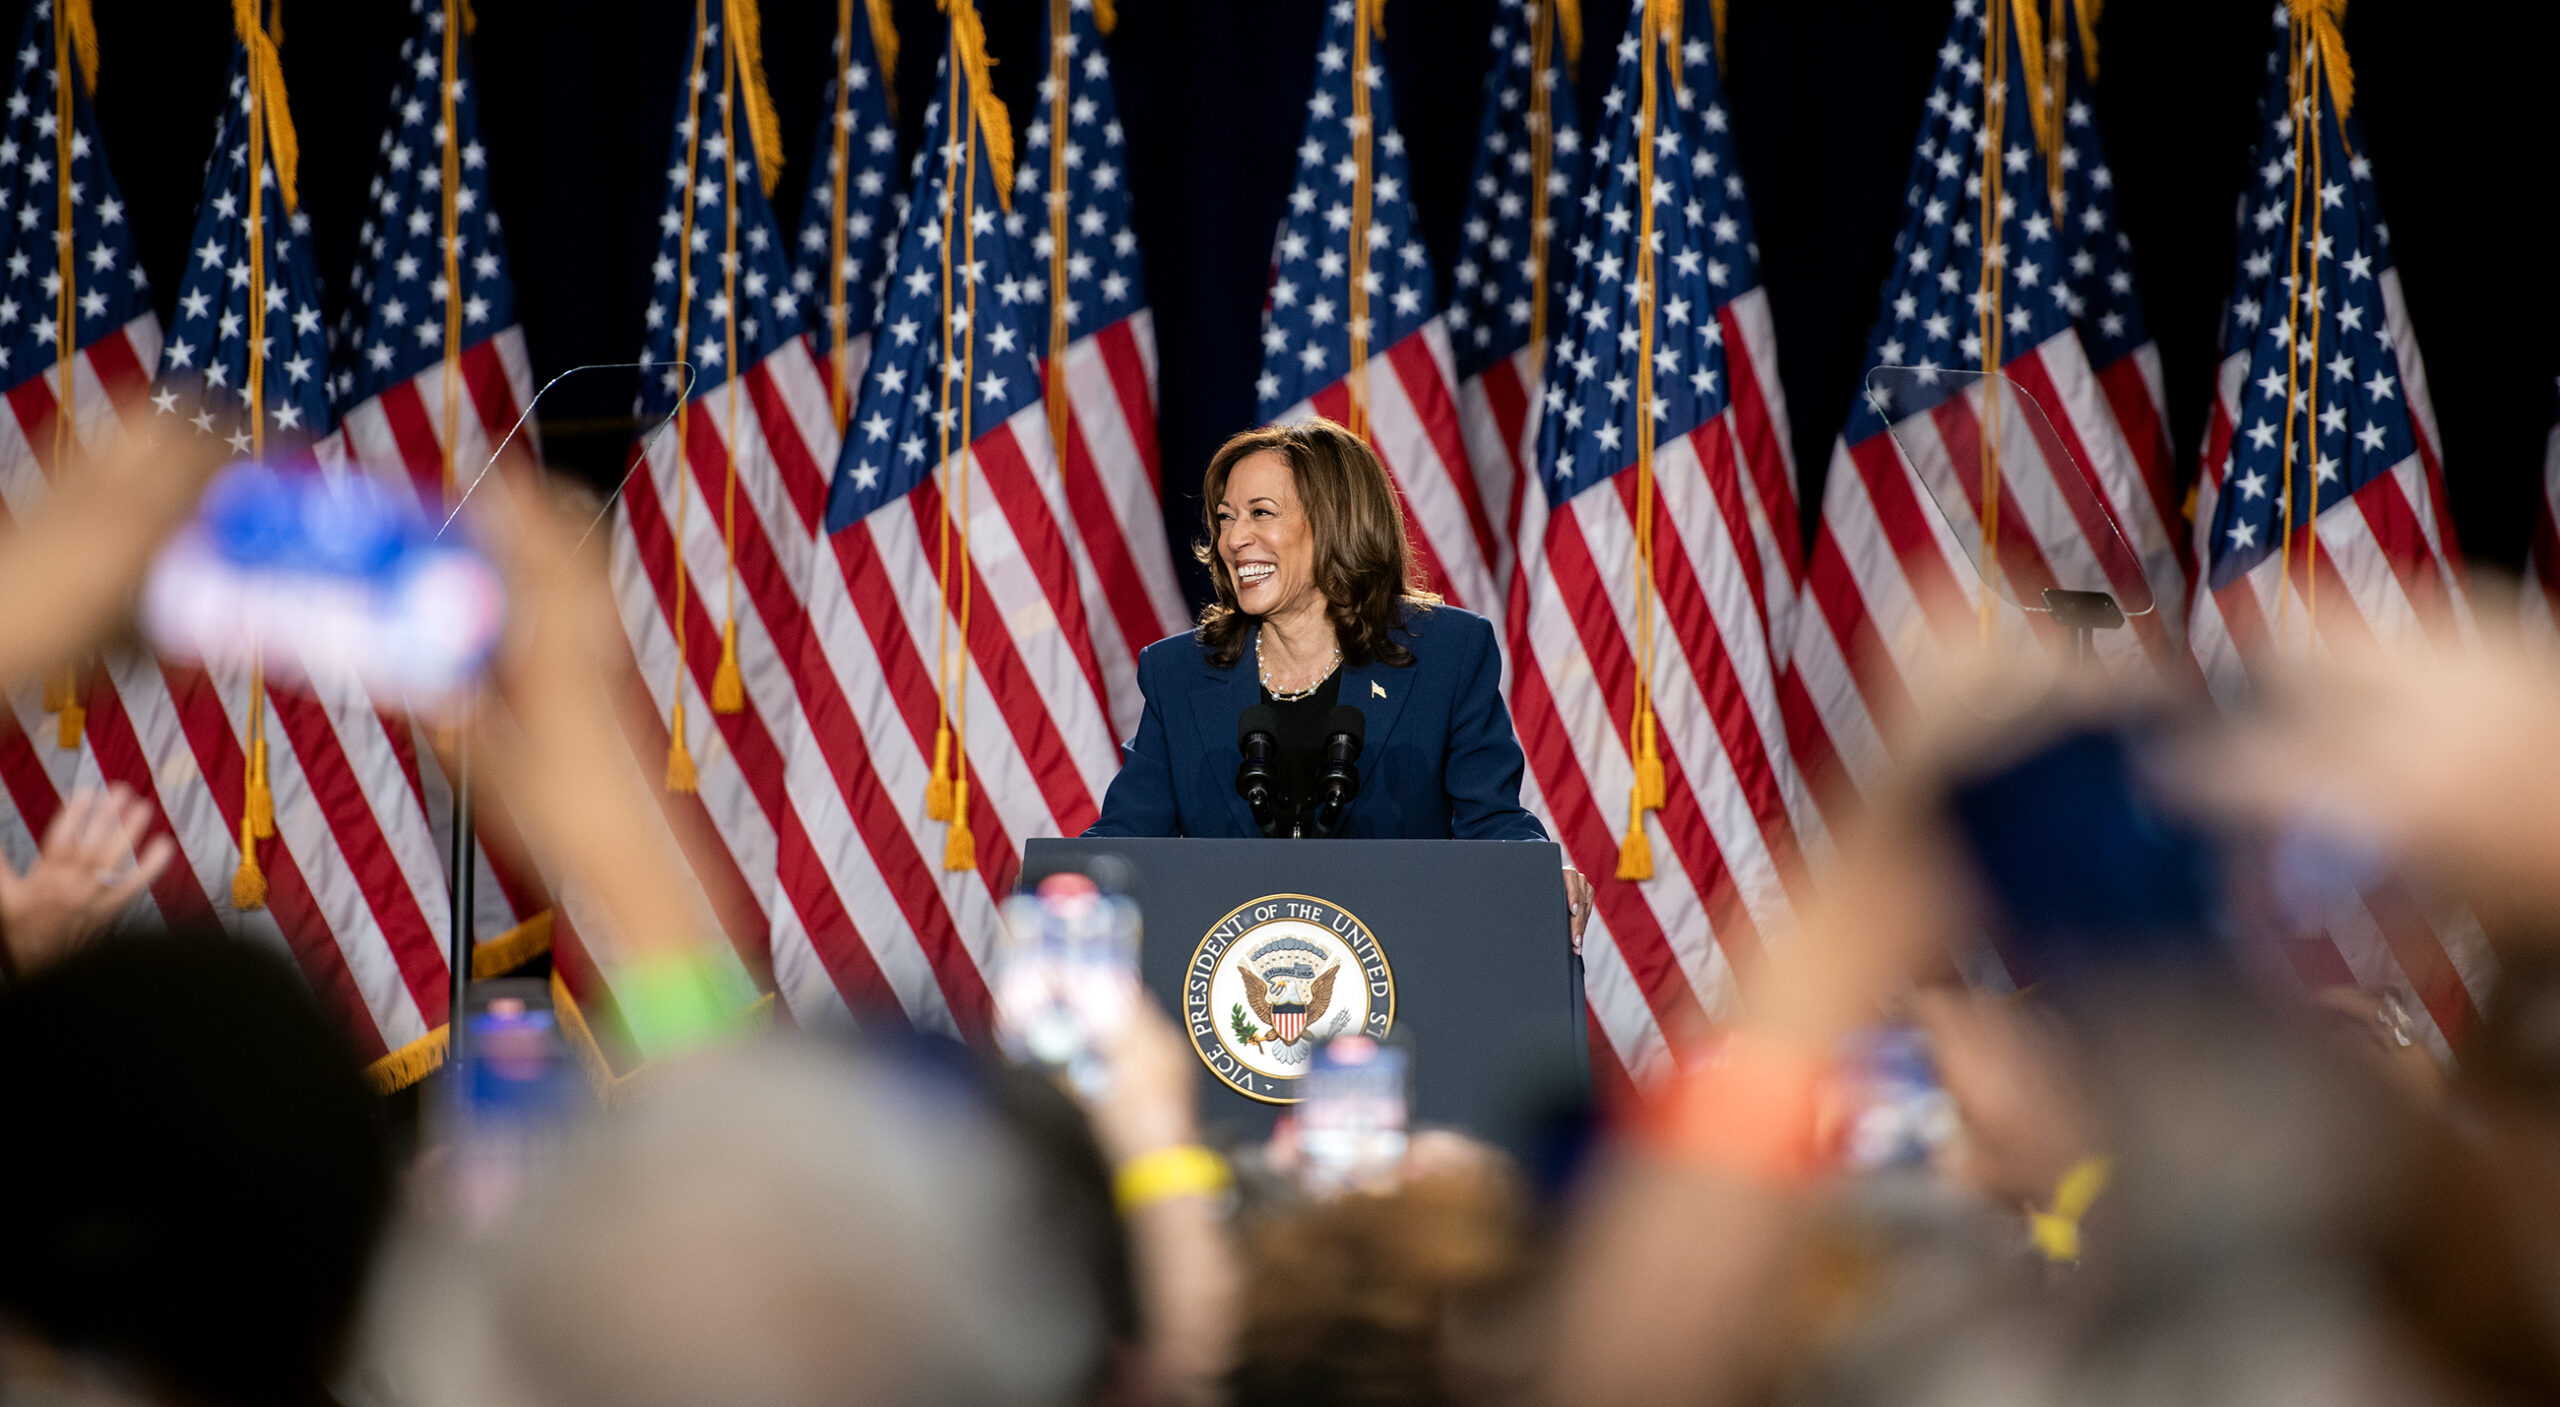 Harris launches ‘sprint’ to November election in Wisconsin at first presidential campaign rally